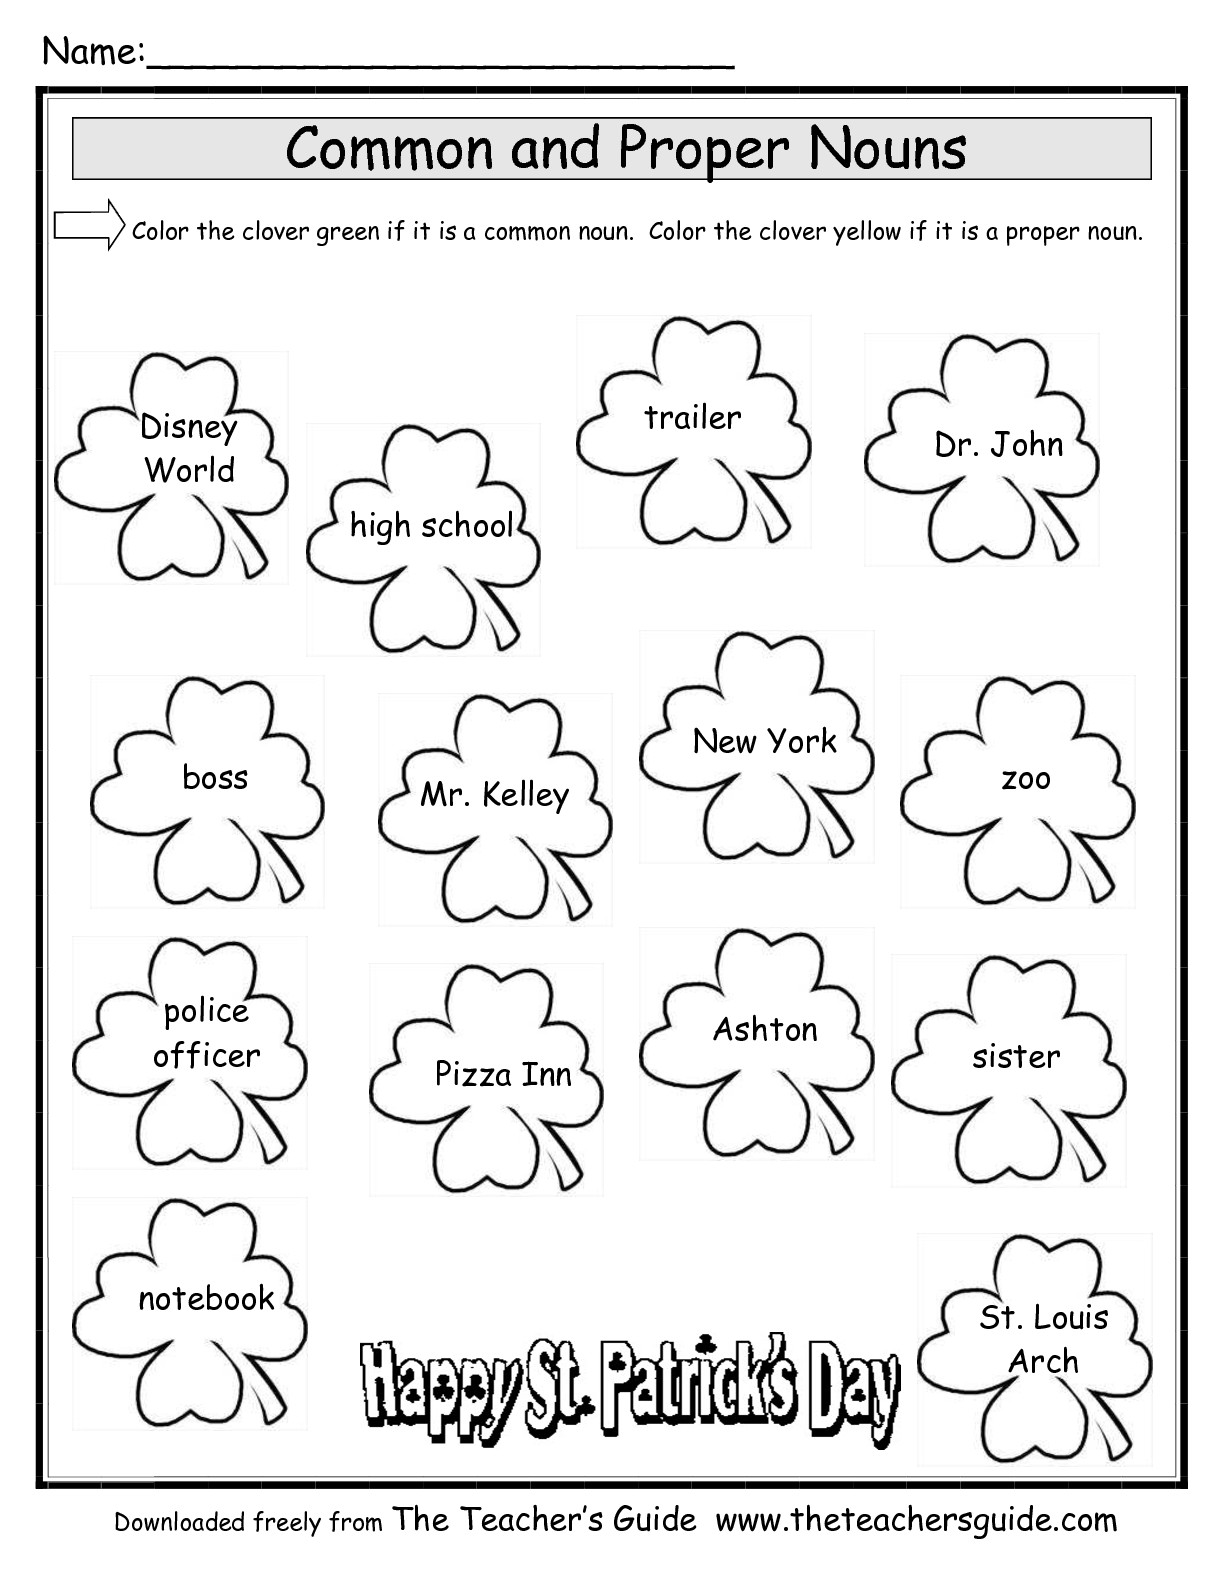 common-and-proper-nouns-printable-worksheets-for-grade-2-kidpid